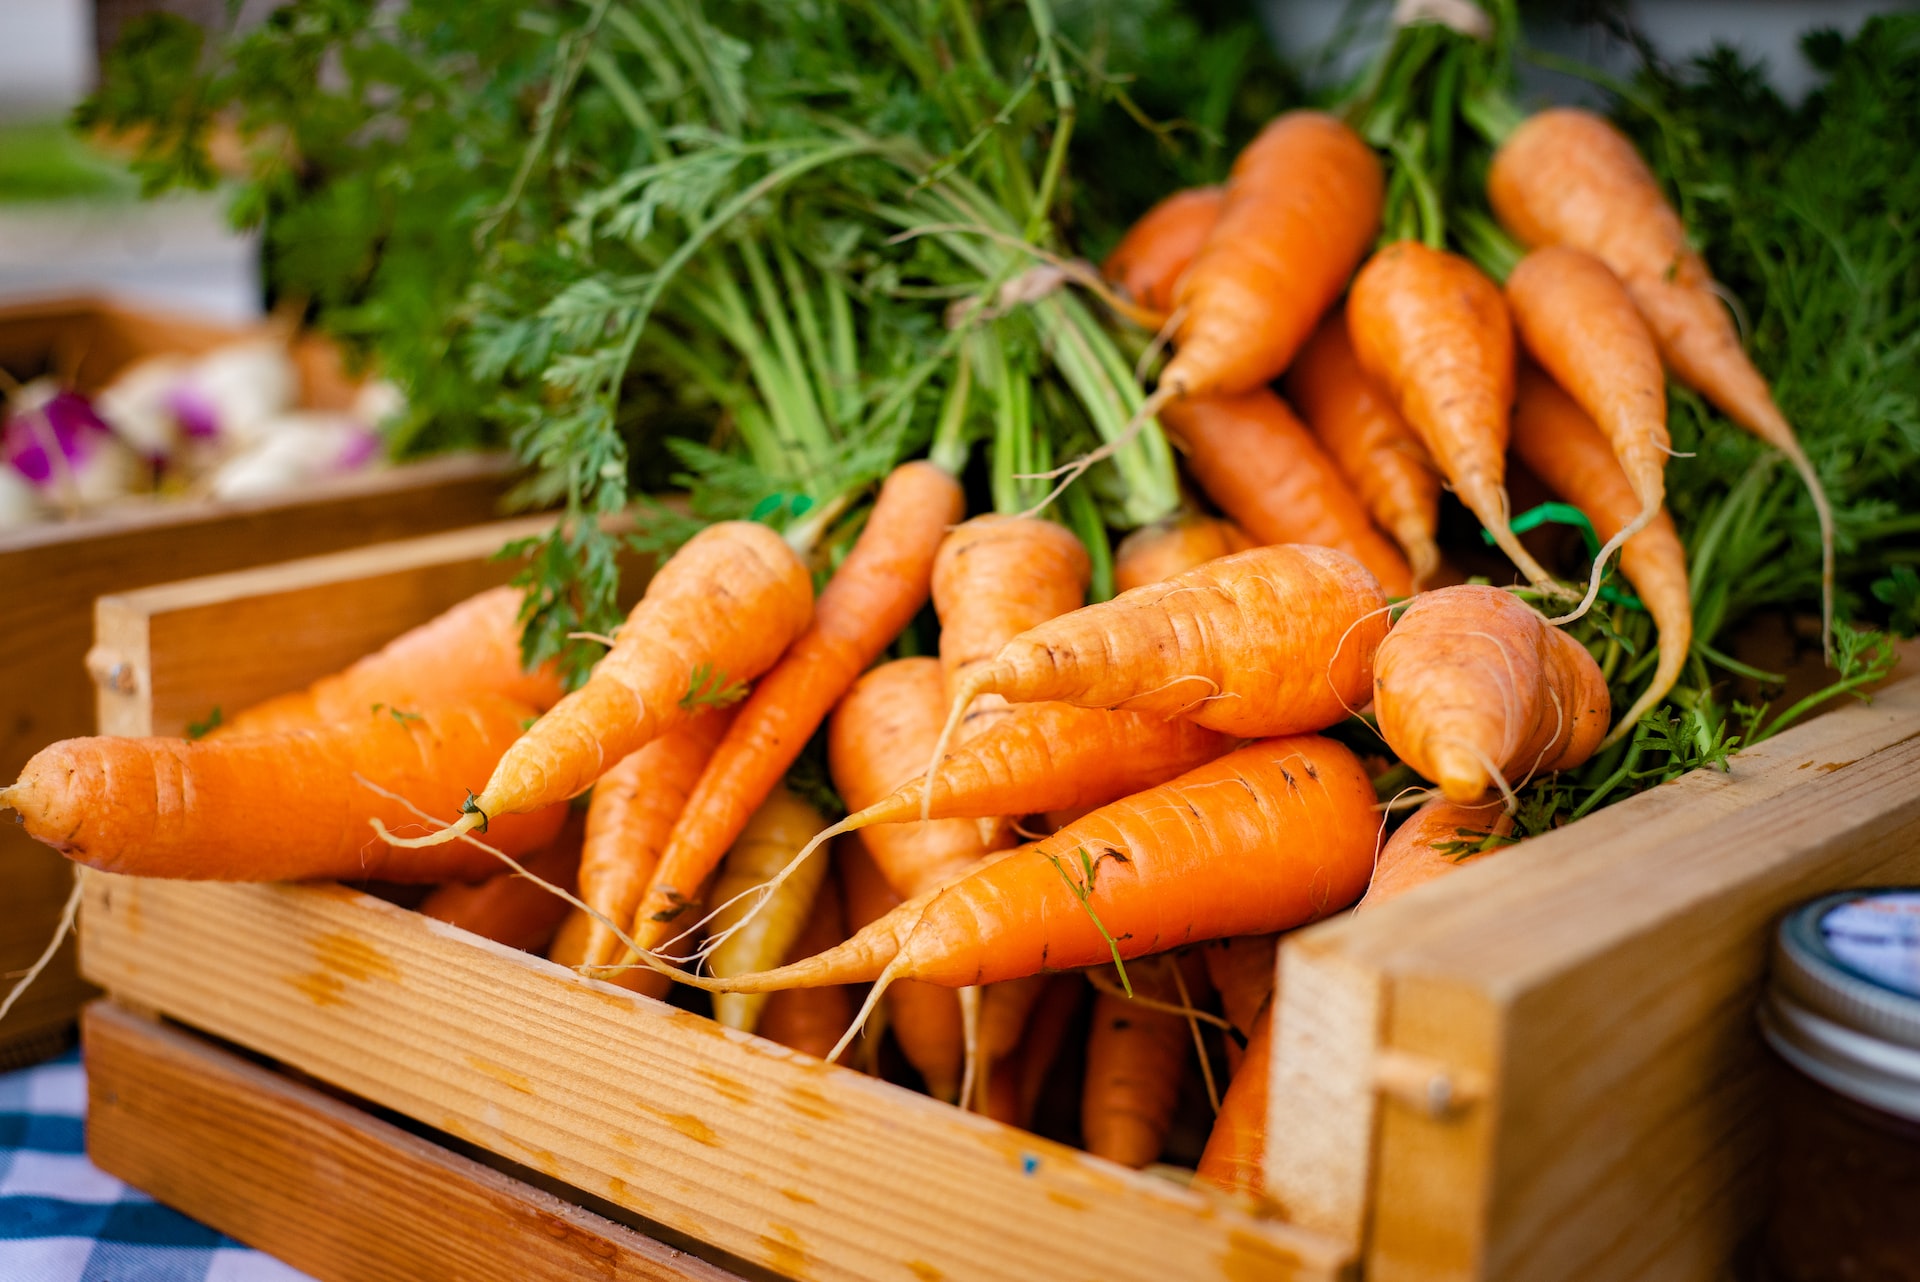 Buying Regular Carrots And Cutting Them Is Healthier And More Cost Effective